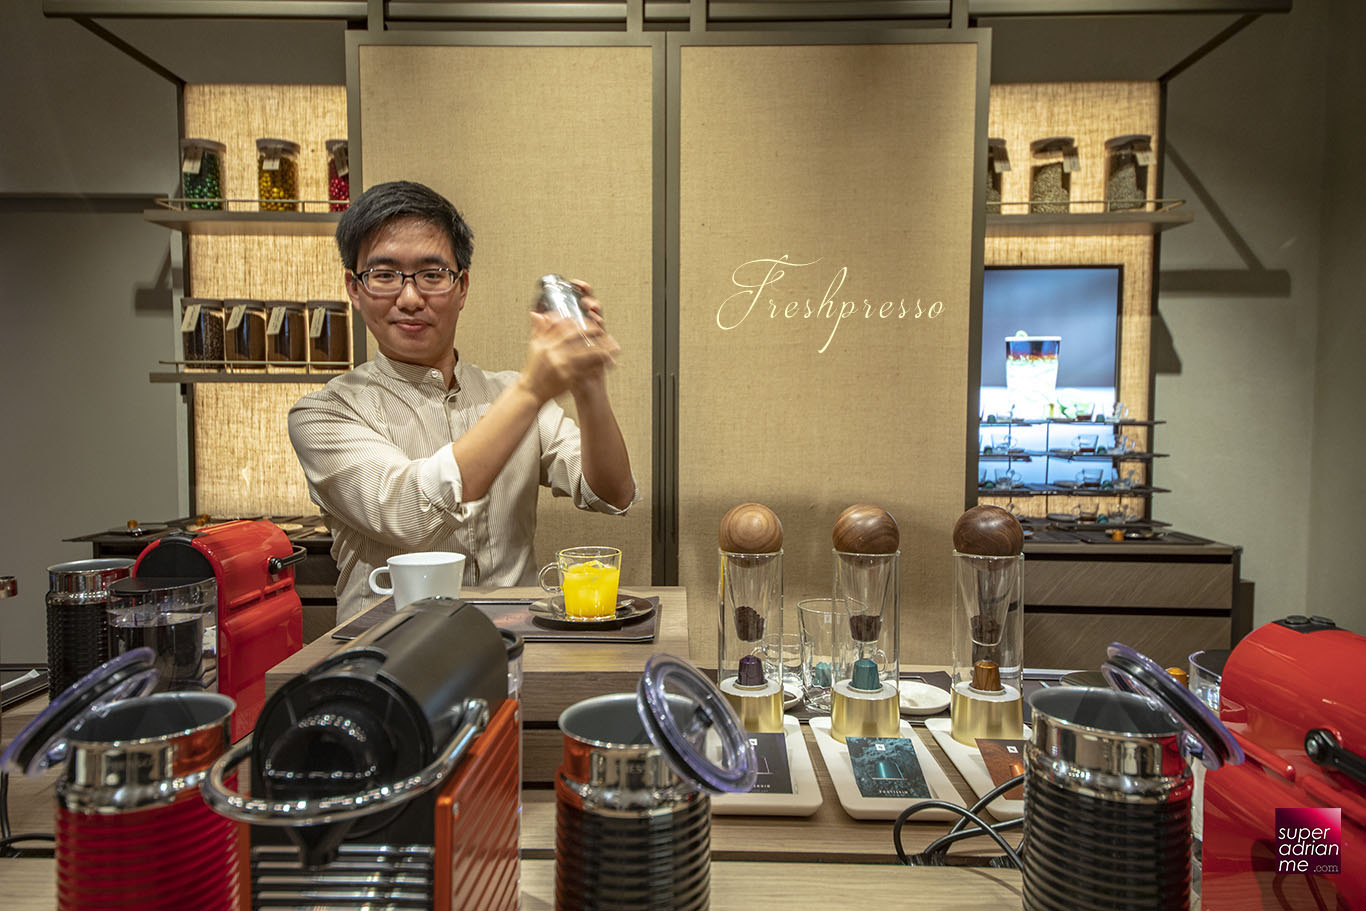 Demonstration on making a Freshpresso at Nespresso's Coffee Creations Masterclass at Nespresso VivoCity Boutique 